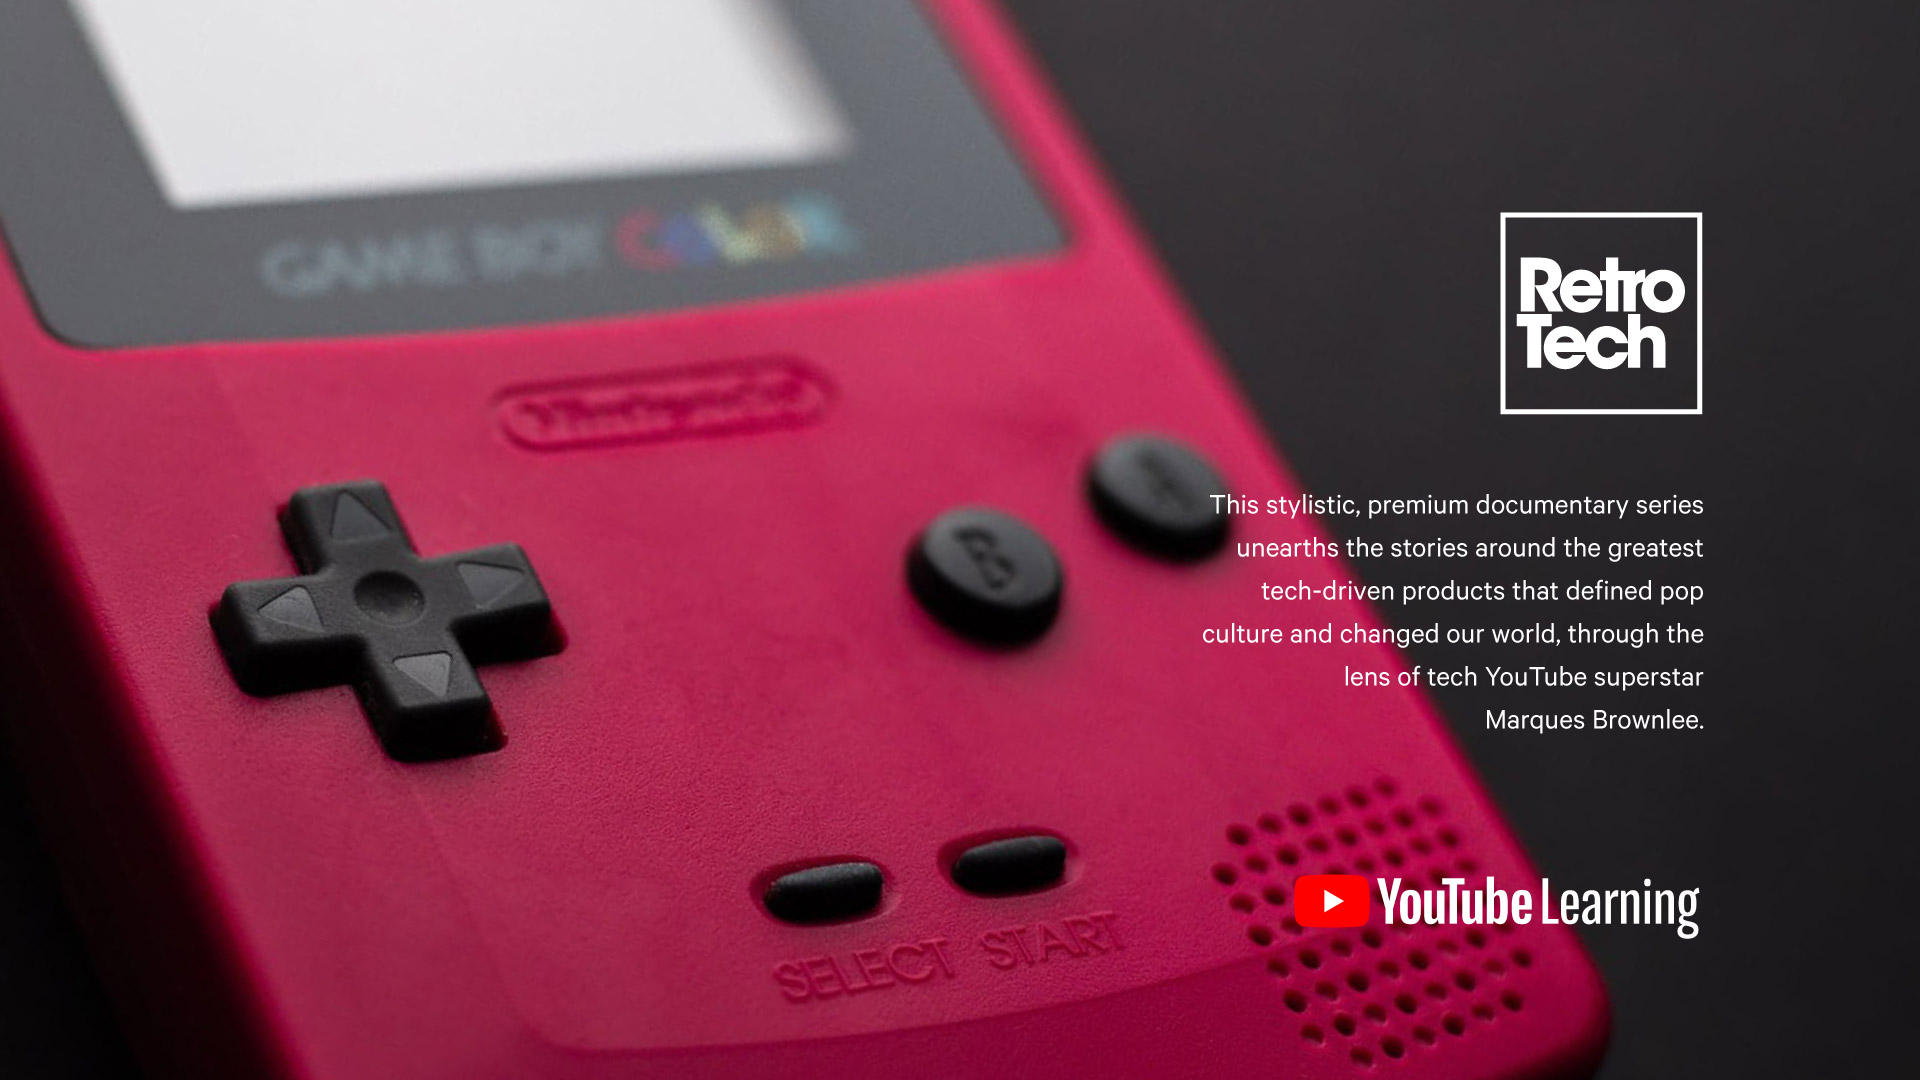 red-game-boy-color-on-black-background-tilted-to-the-left-retro-tech-logo-youtube-learning-logo